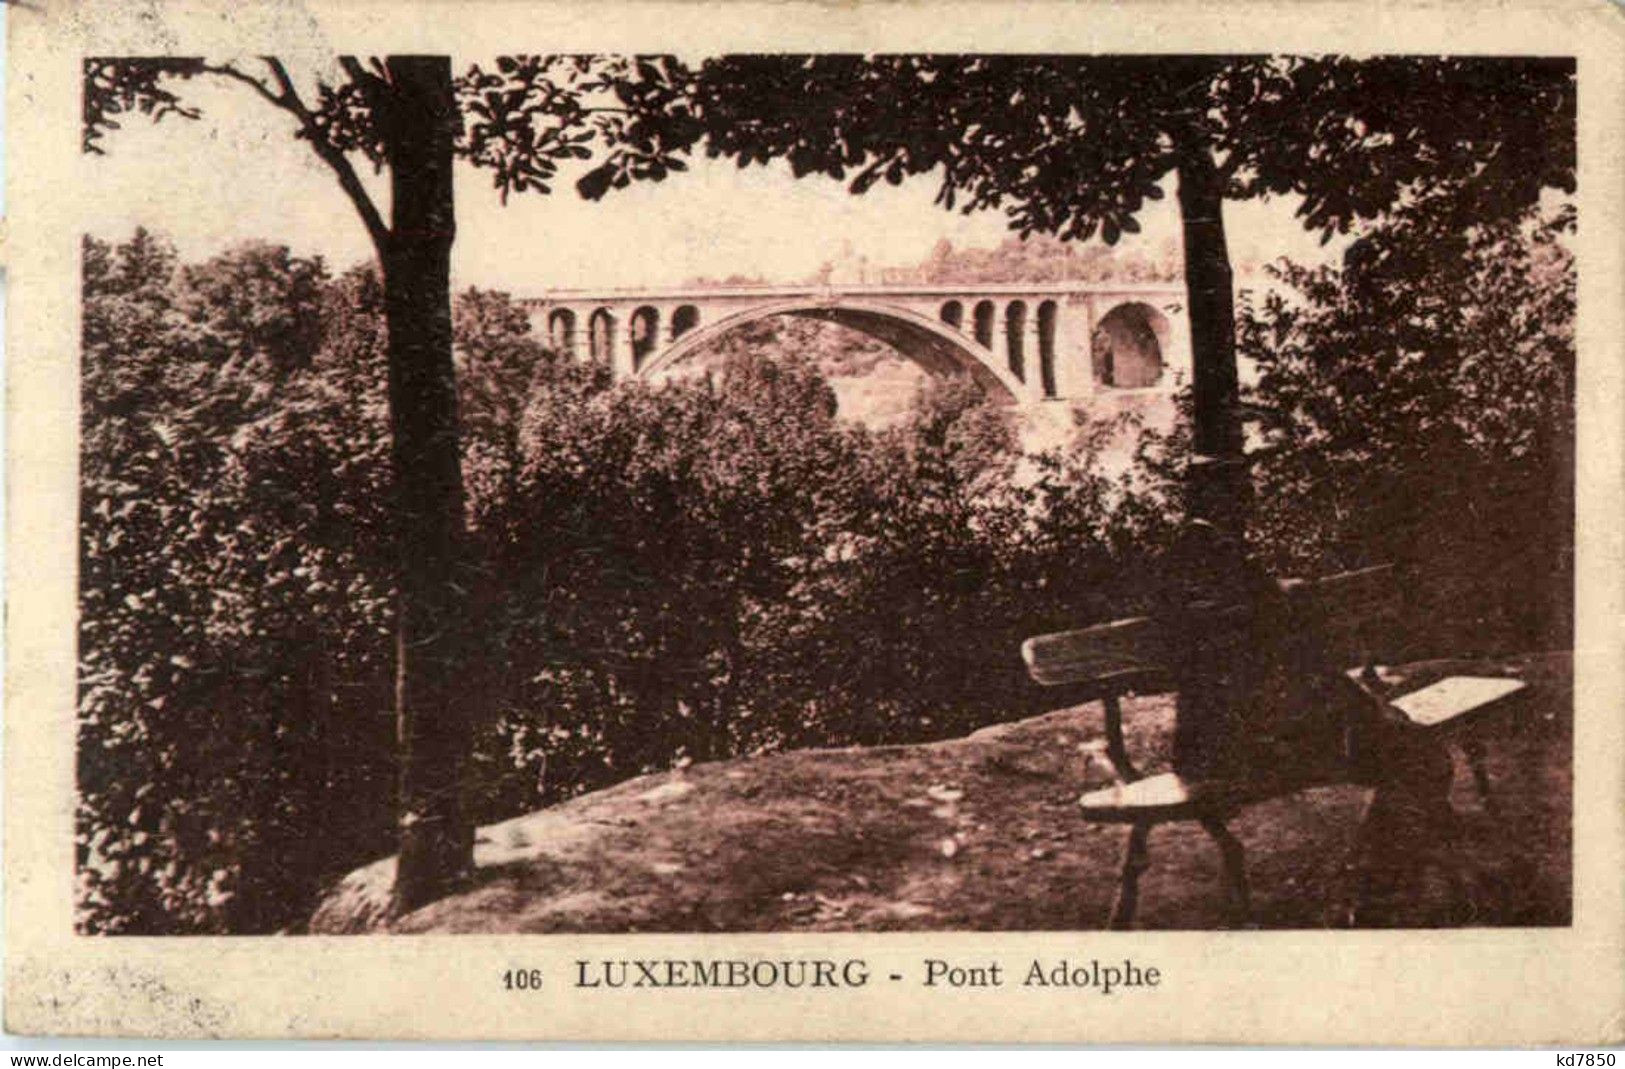 Ludembourg - Pont Adolphe - Luxemburg - Stadt